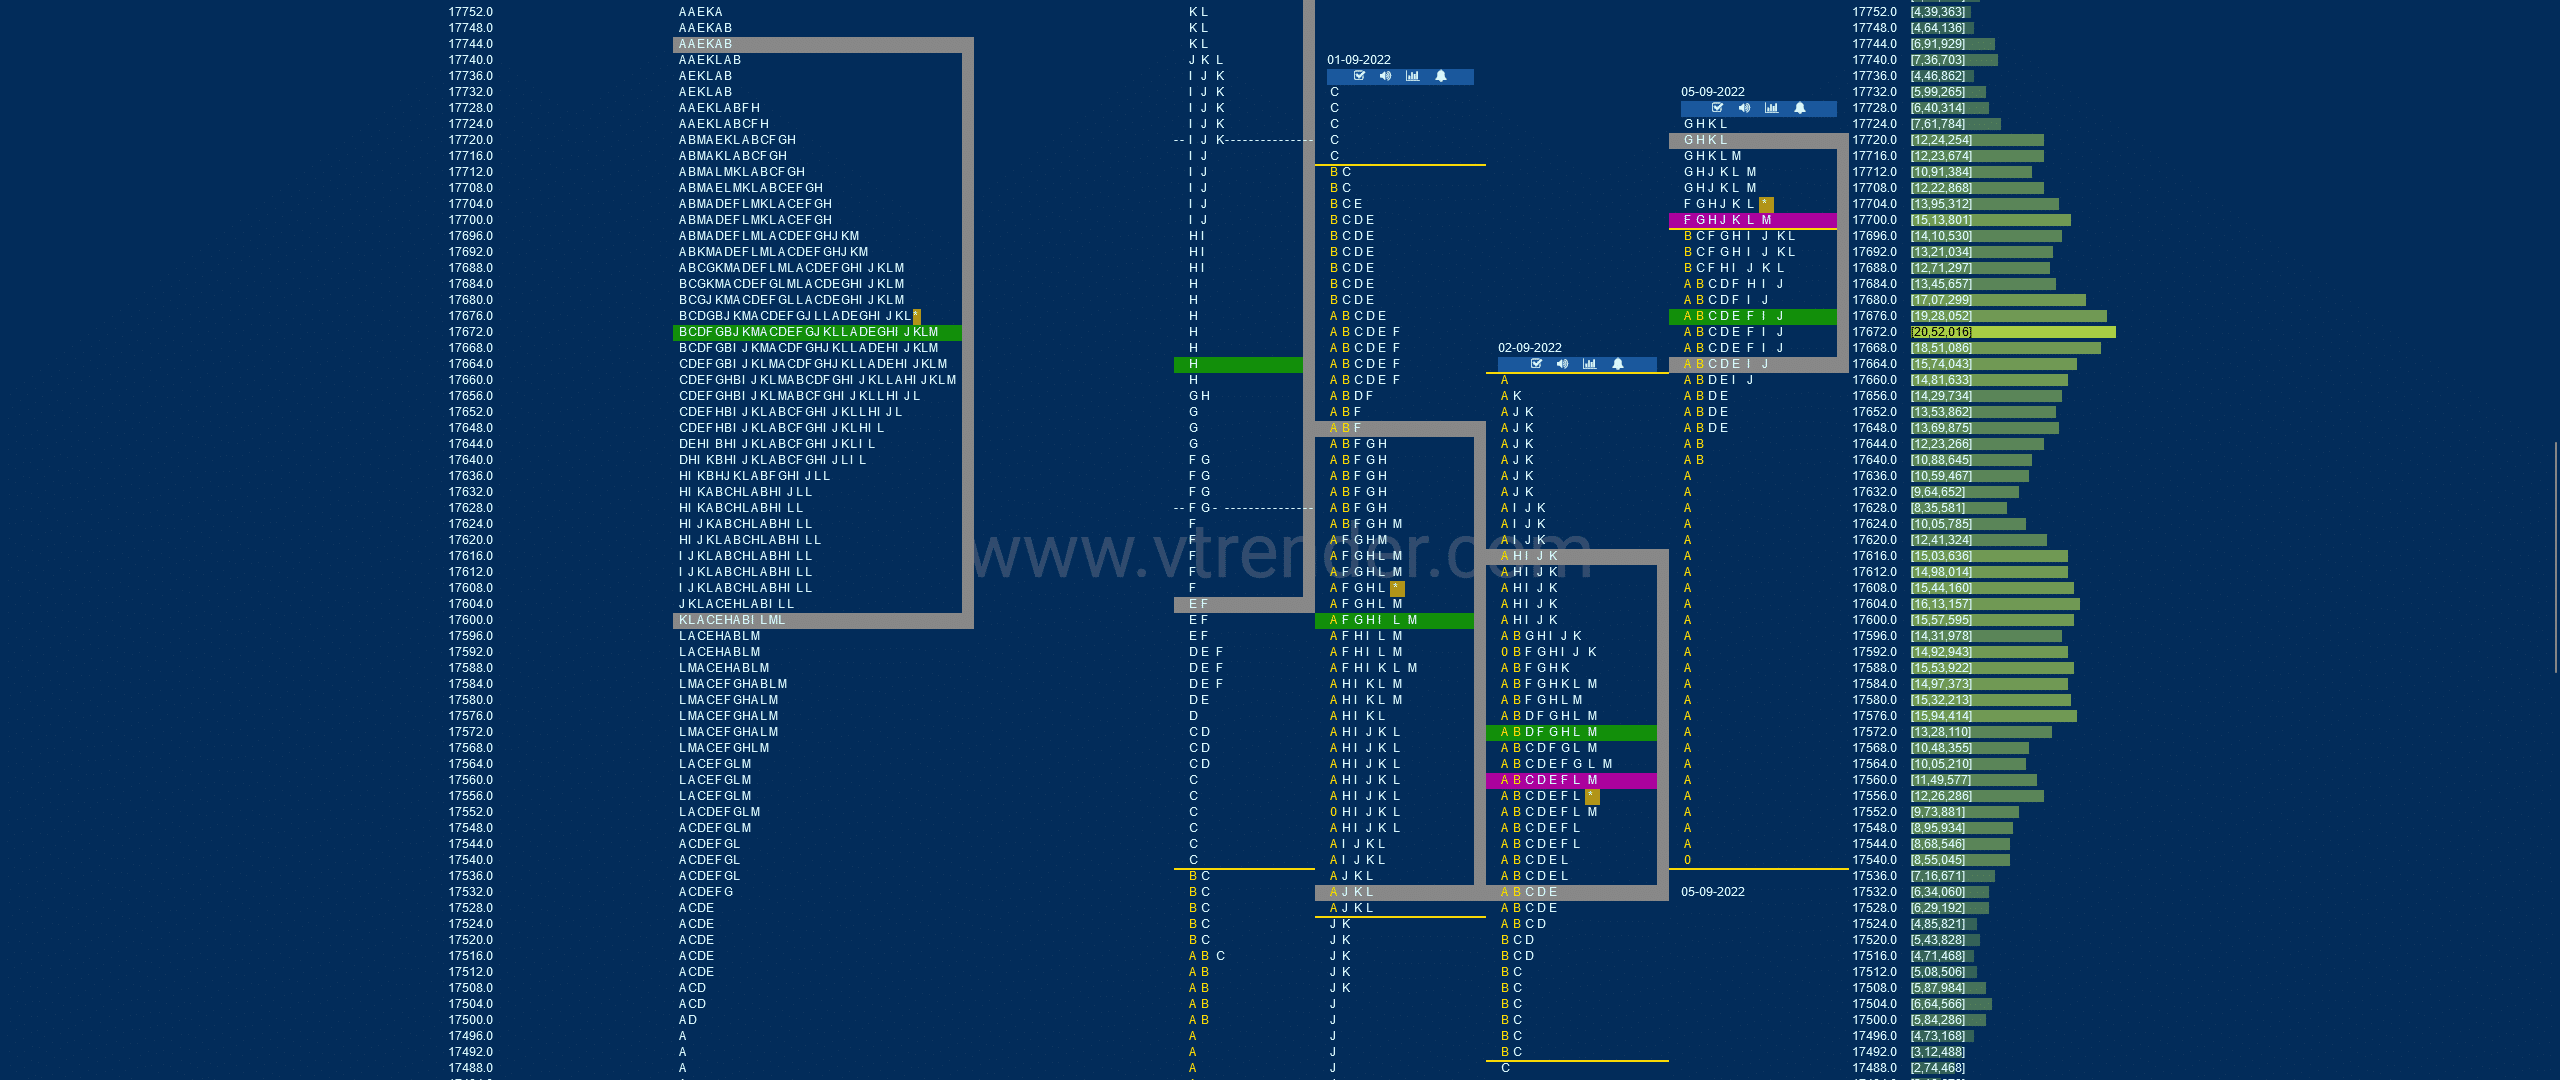 Nf 2 Market Profile Analysis Dated 05Th Sep 2022 Uncategorized